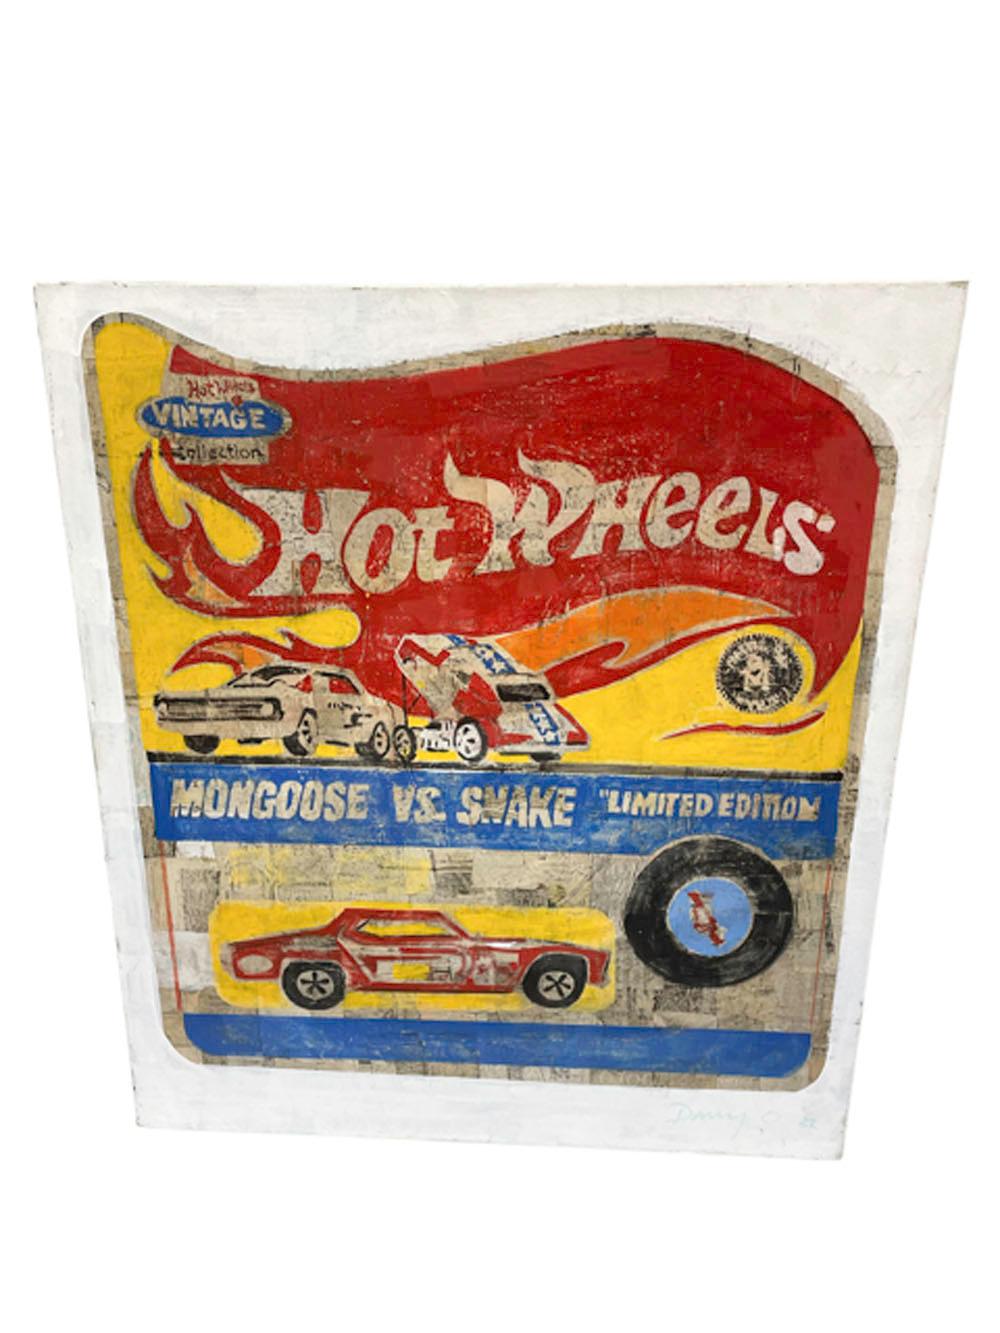 Contemporary oil and paper on canvas 'Hot Wheels - Mongoose vs. Snake' painting based on vintage packaging and advertisement materials. By Danny O'Conner and signed lower-right Danny O' '22. In this work Danny uses newspaper and paint on canvas to